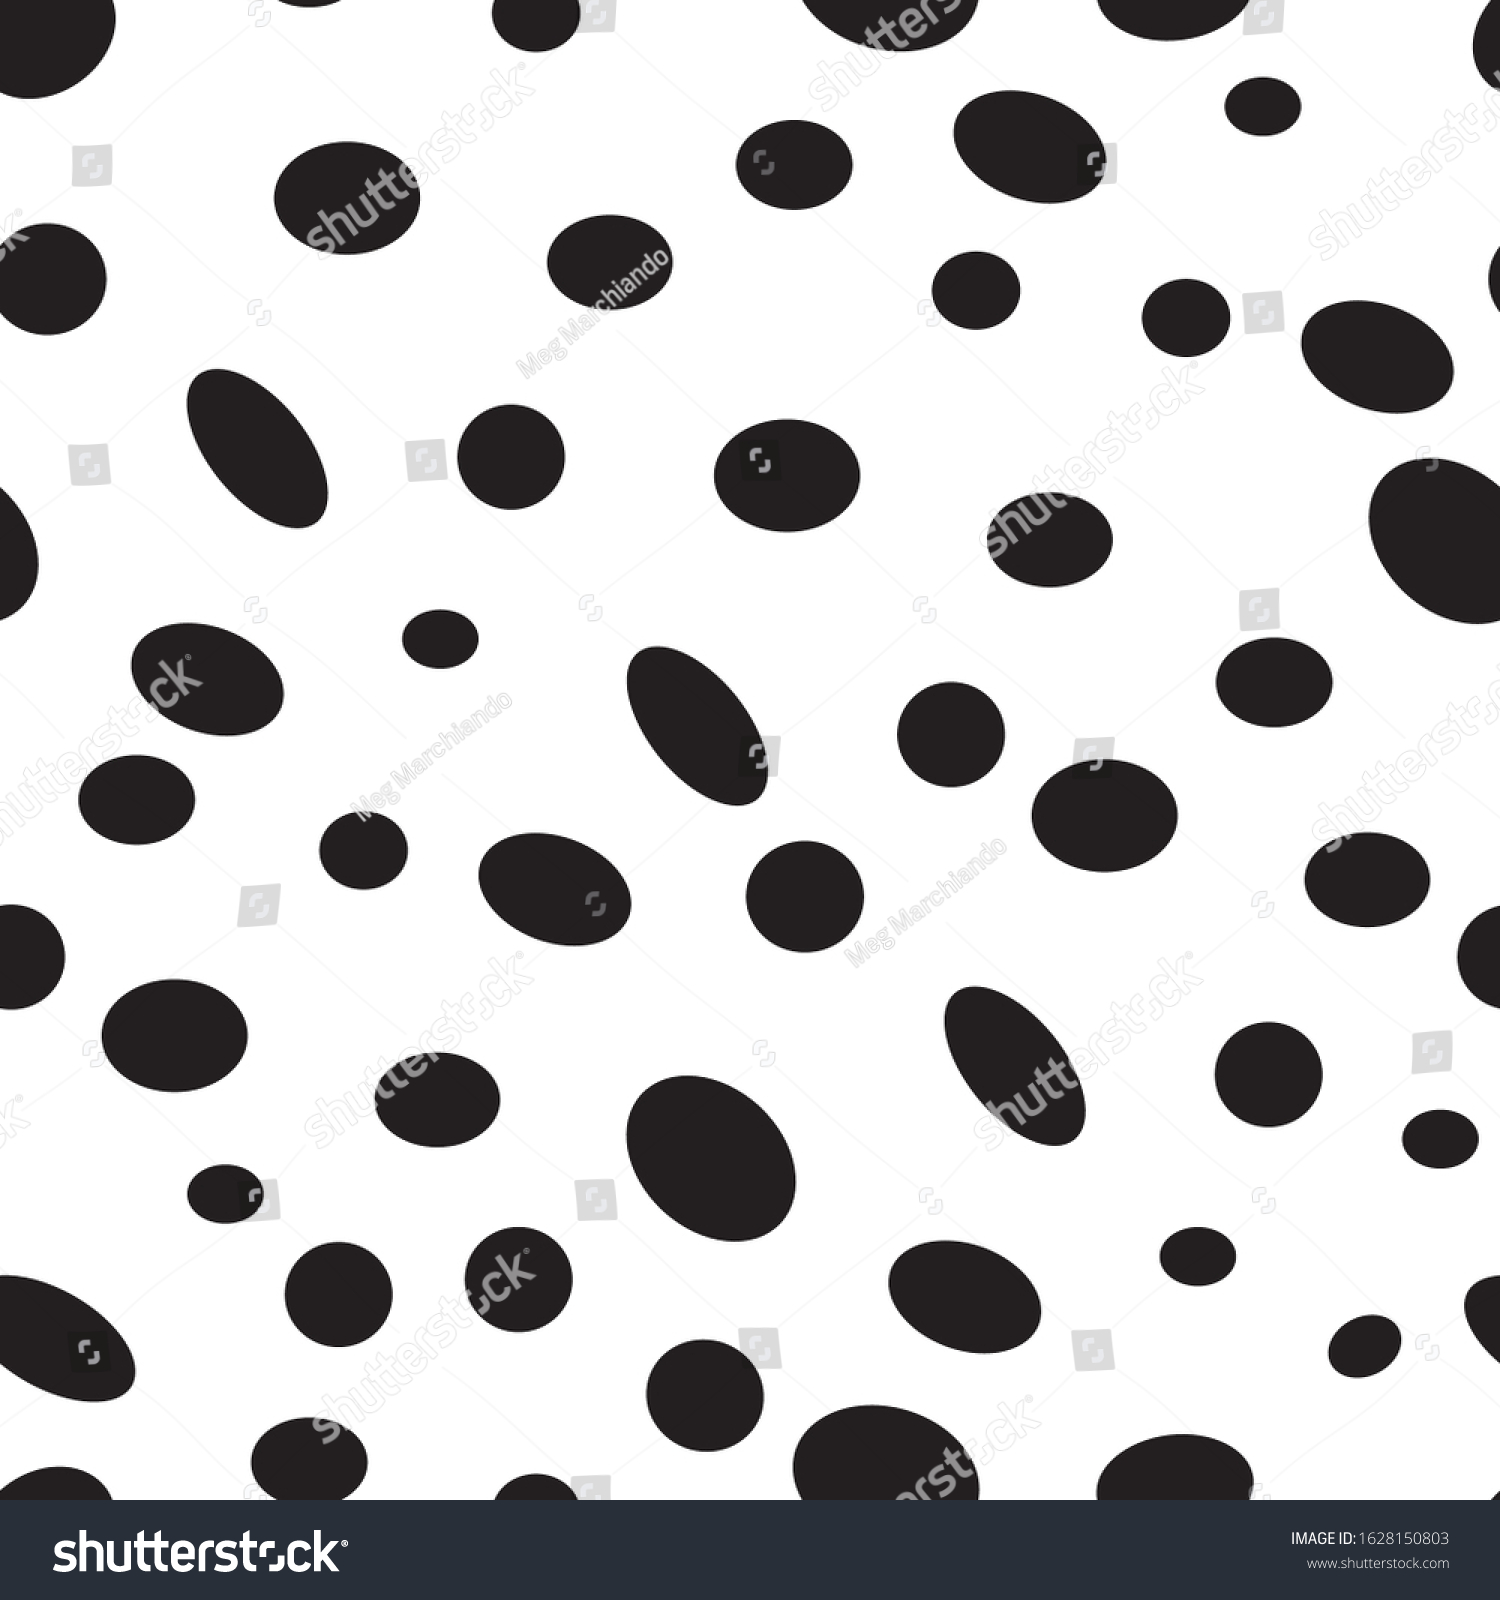 SVG of Seeing spots, Misshappen black spots on white background, seamless vecttor repeat pattern svg